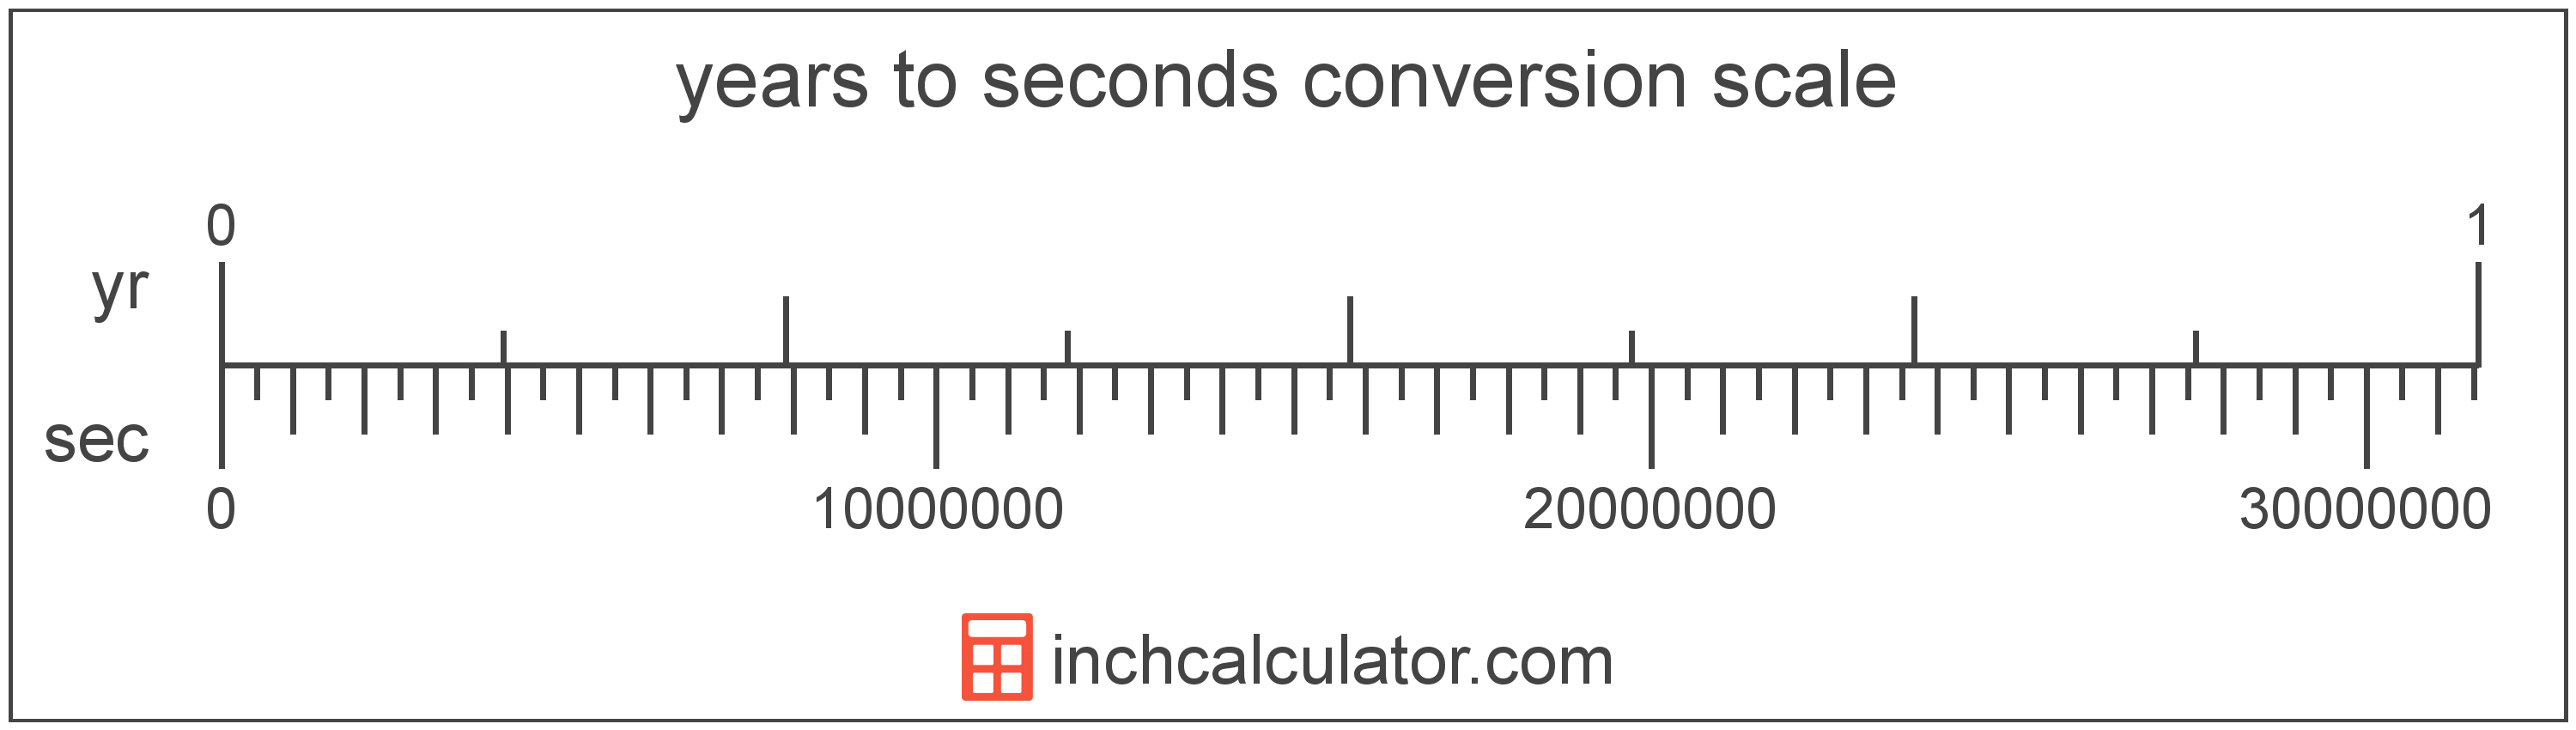 conversion scale showing years and equivalent seconds time values